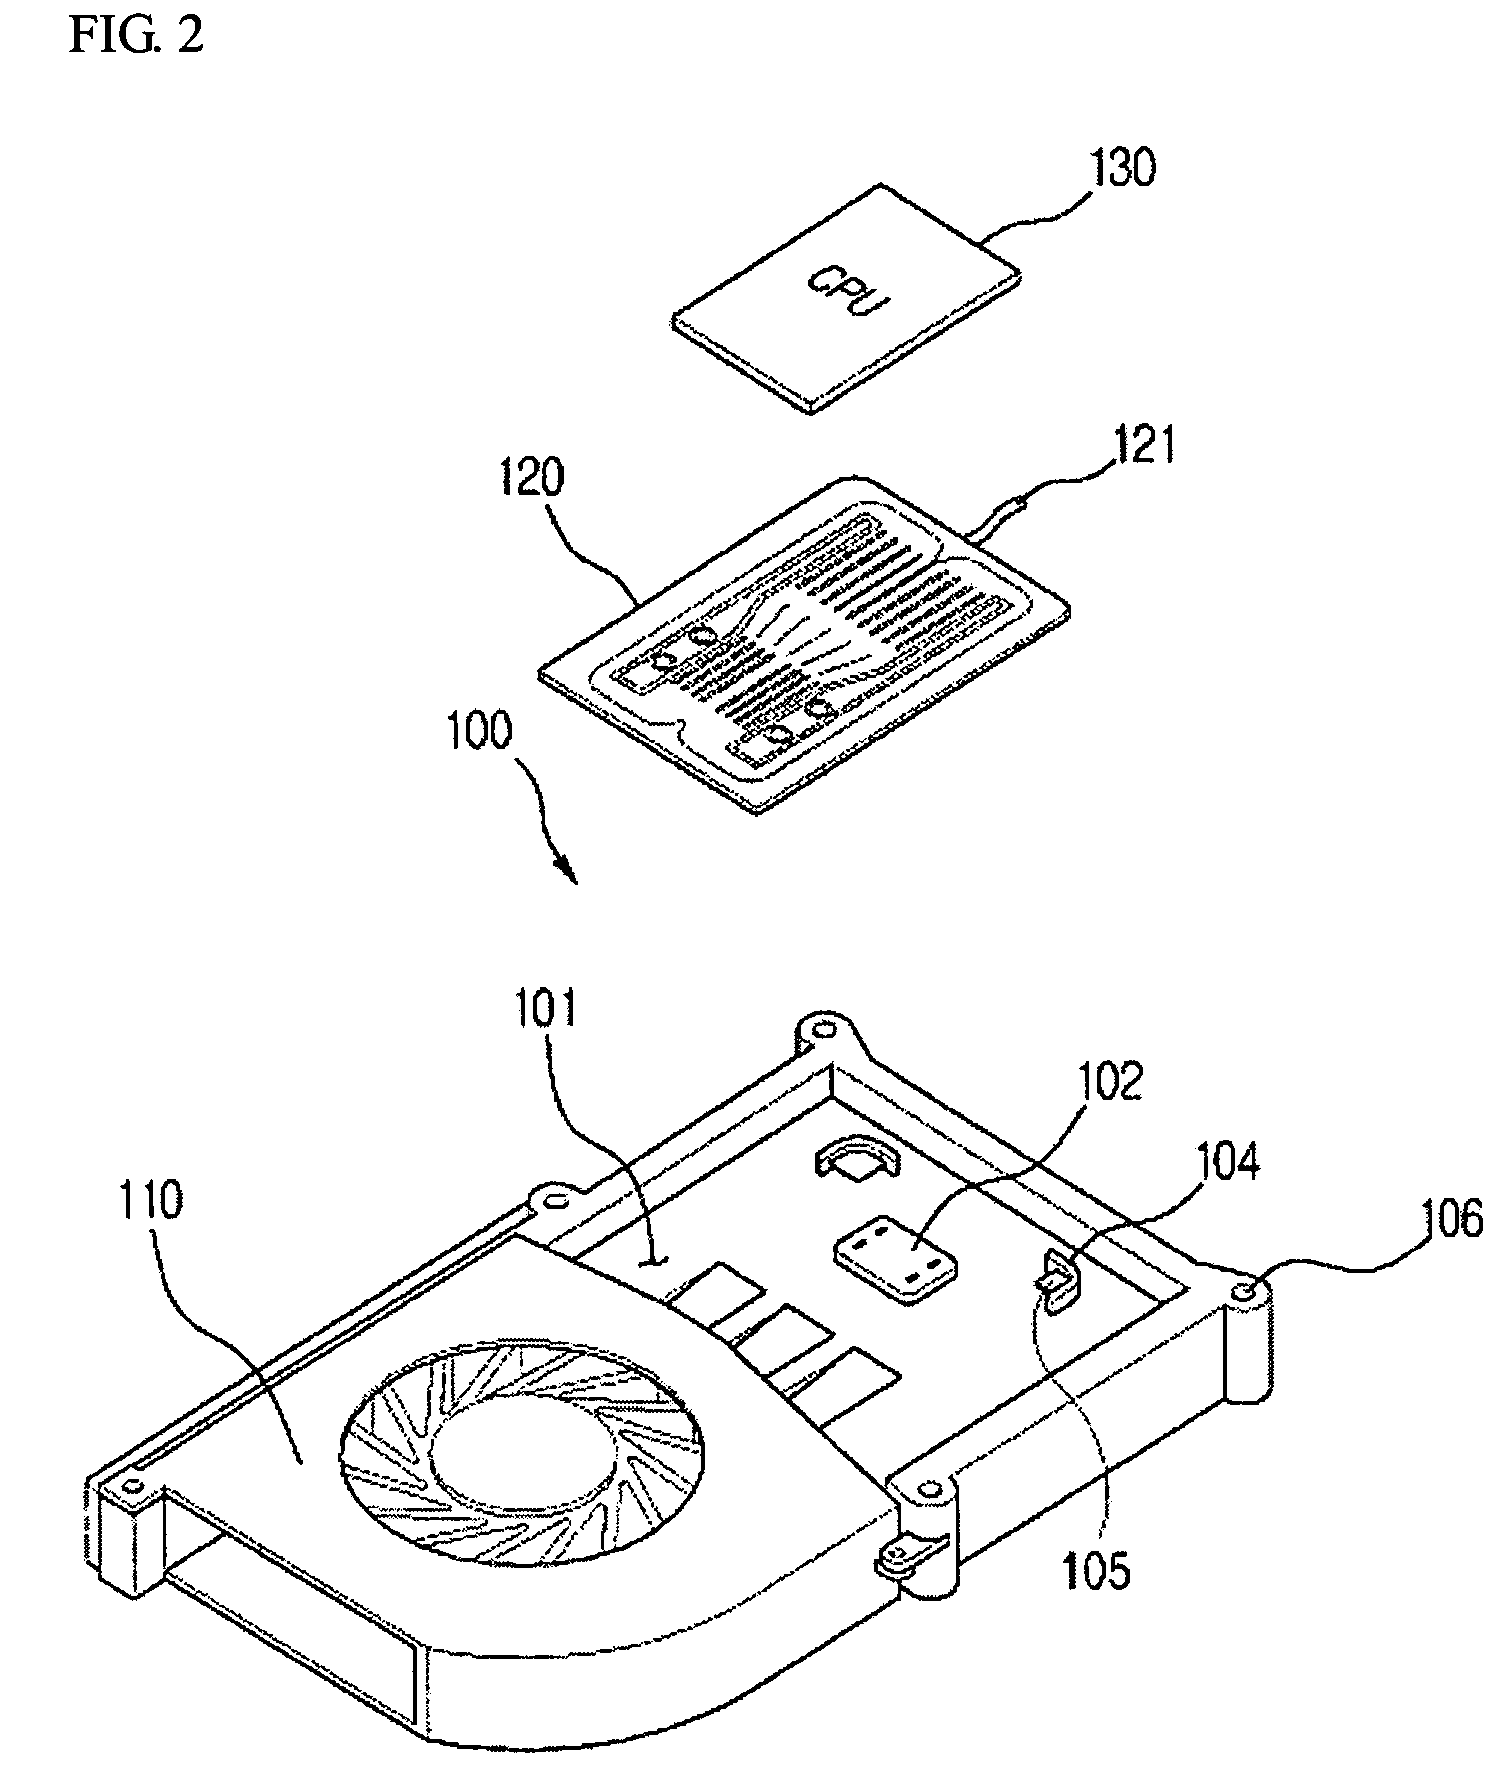 Cooling system for a portable computer